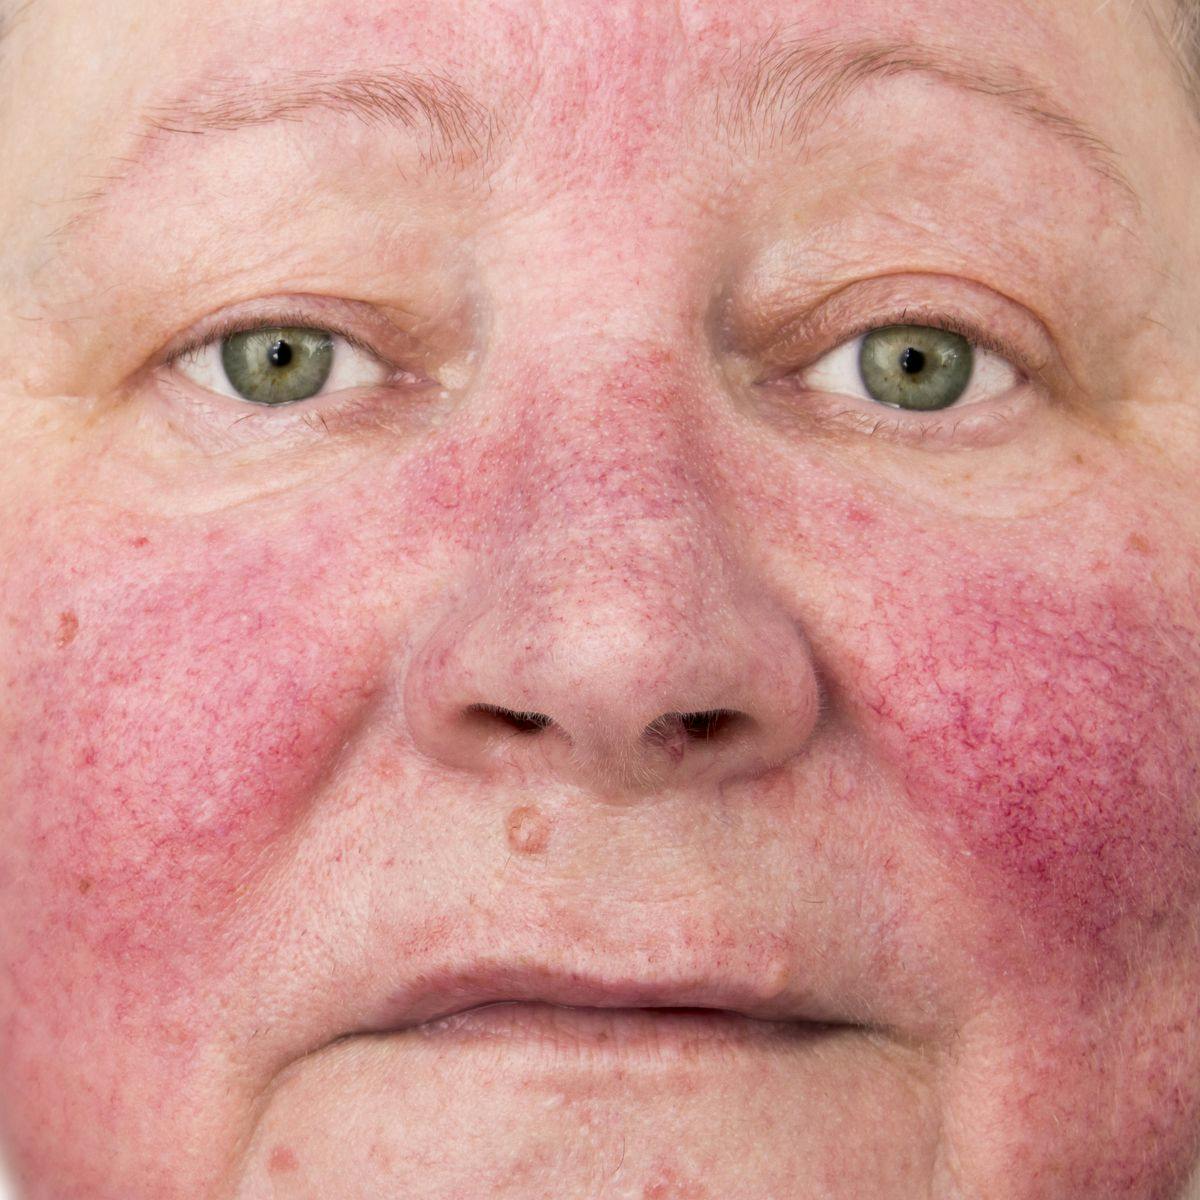 image of rosacea